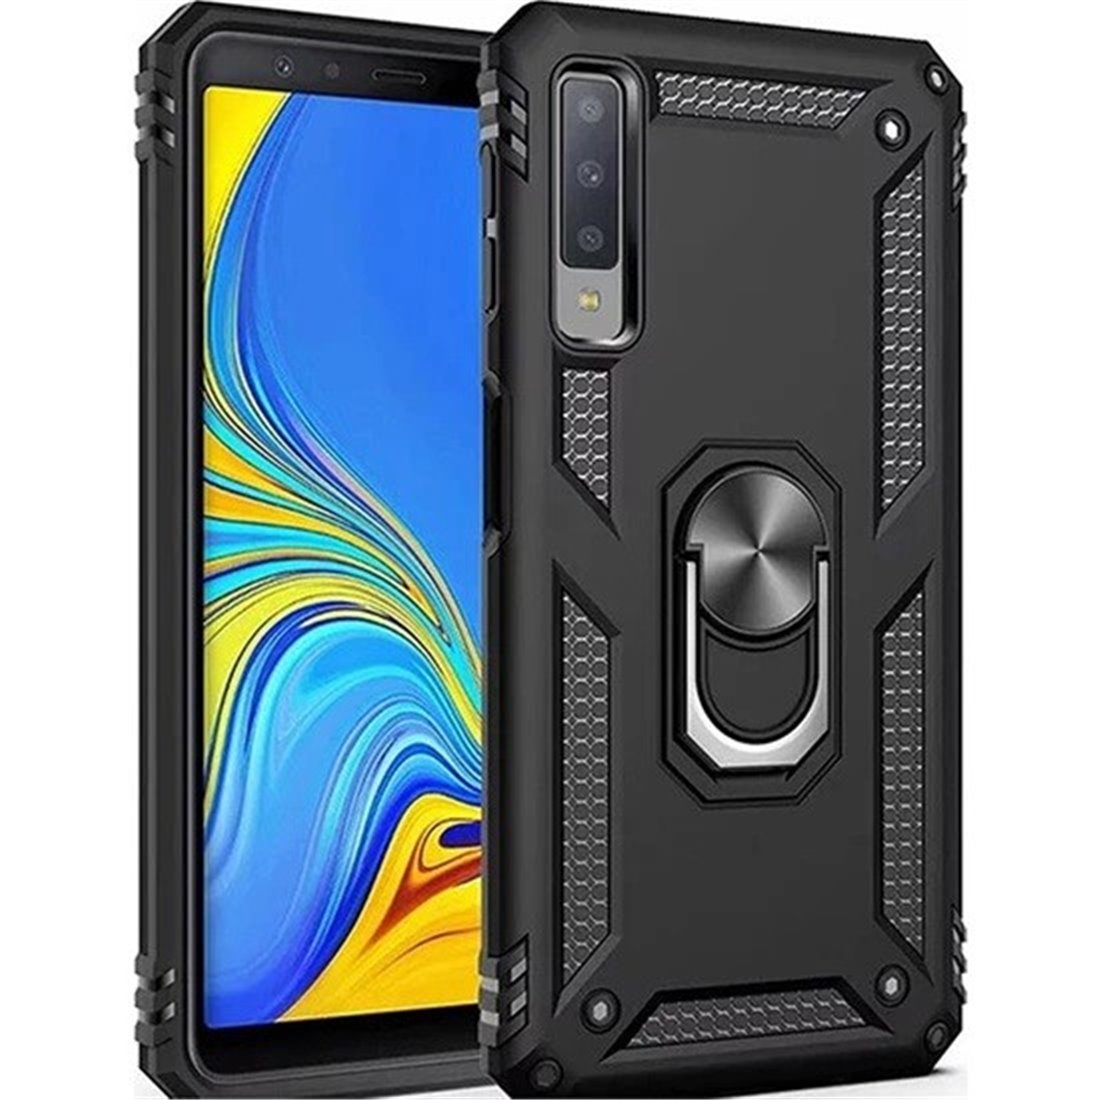 Samsung Galaxy A7 2018 Plastic Black Back Cover - Solid ring